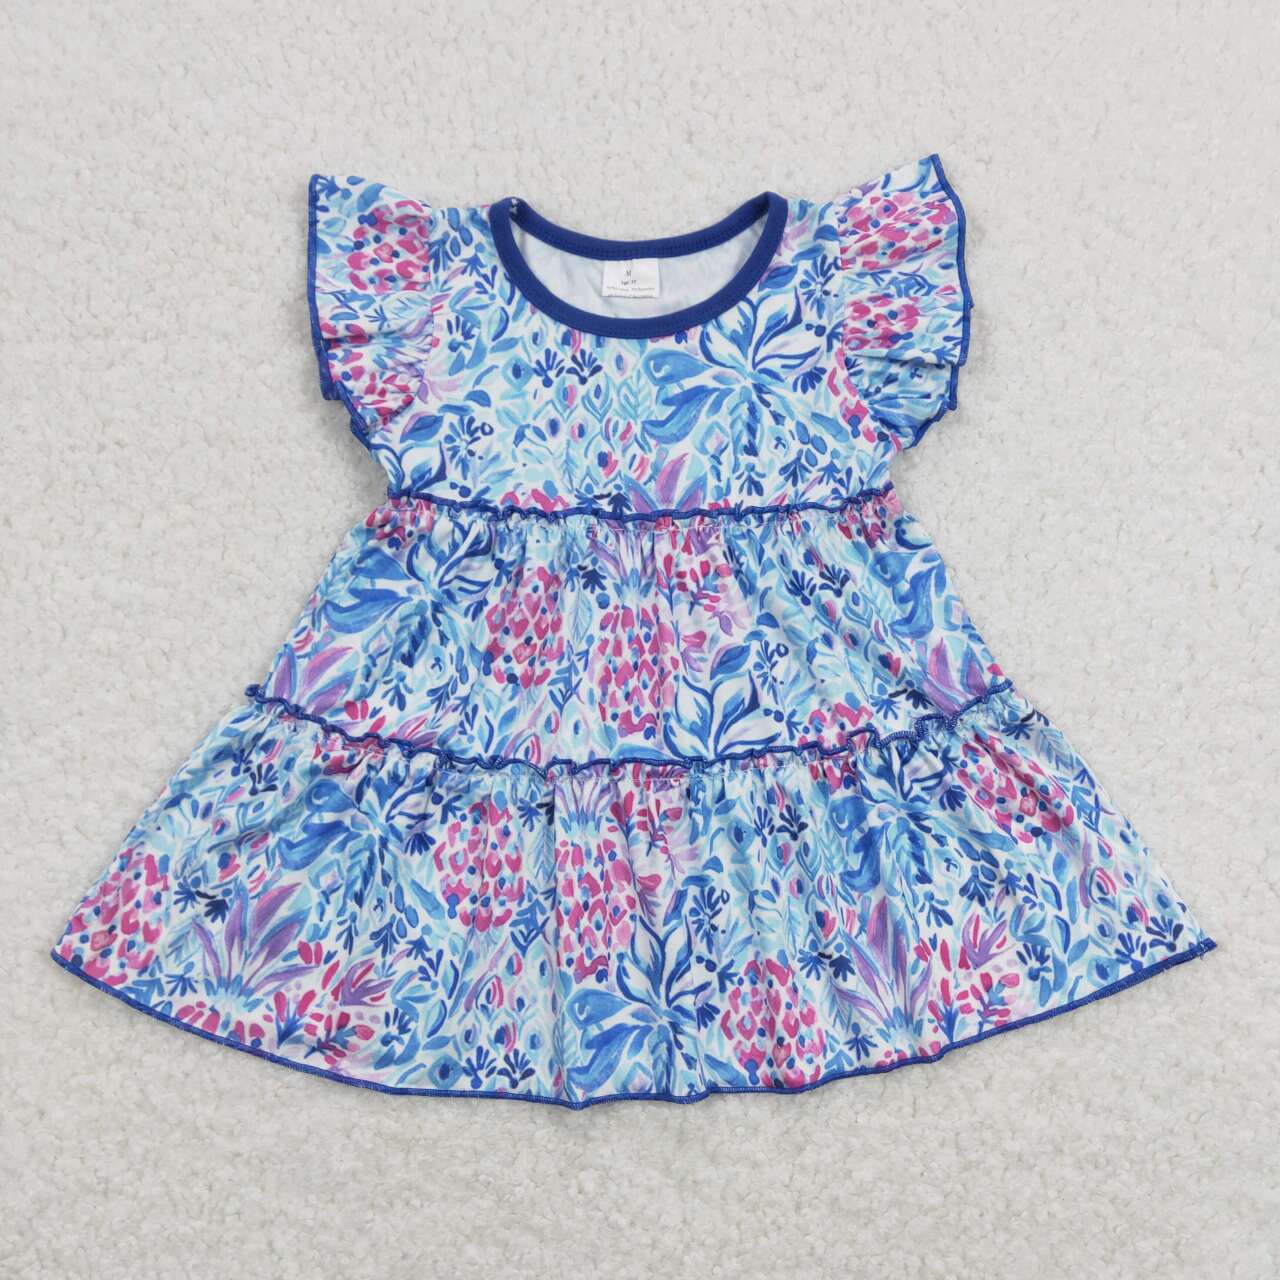 GSPO1499 Blue Flowers Top Blue Sequin Shorts Girls Summer Clothes Sets